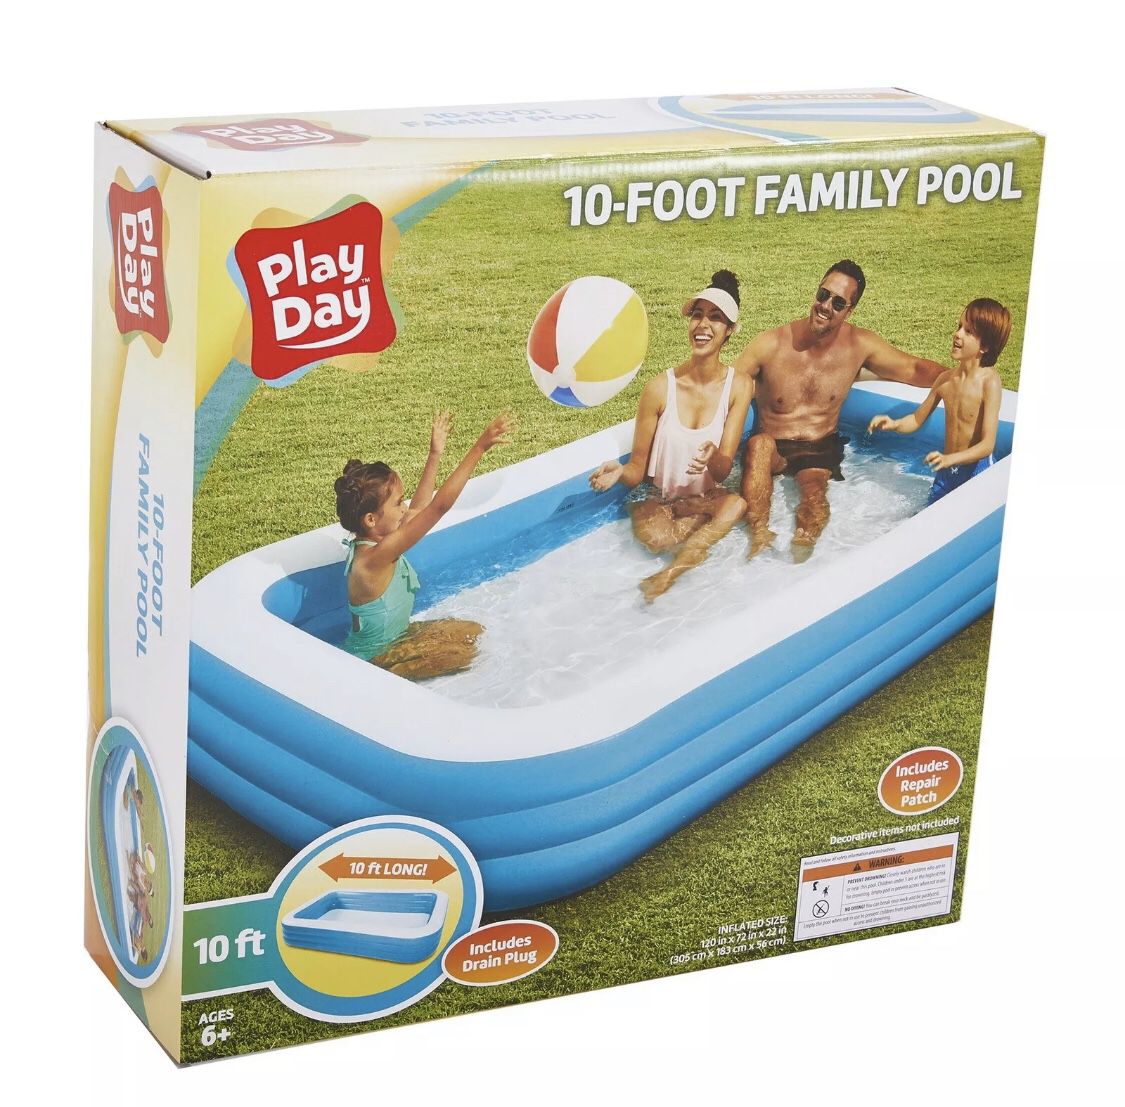 Play day pool 10ft brand new never been used